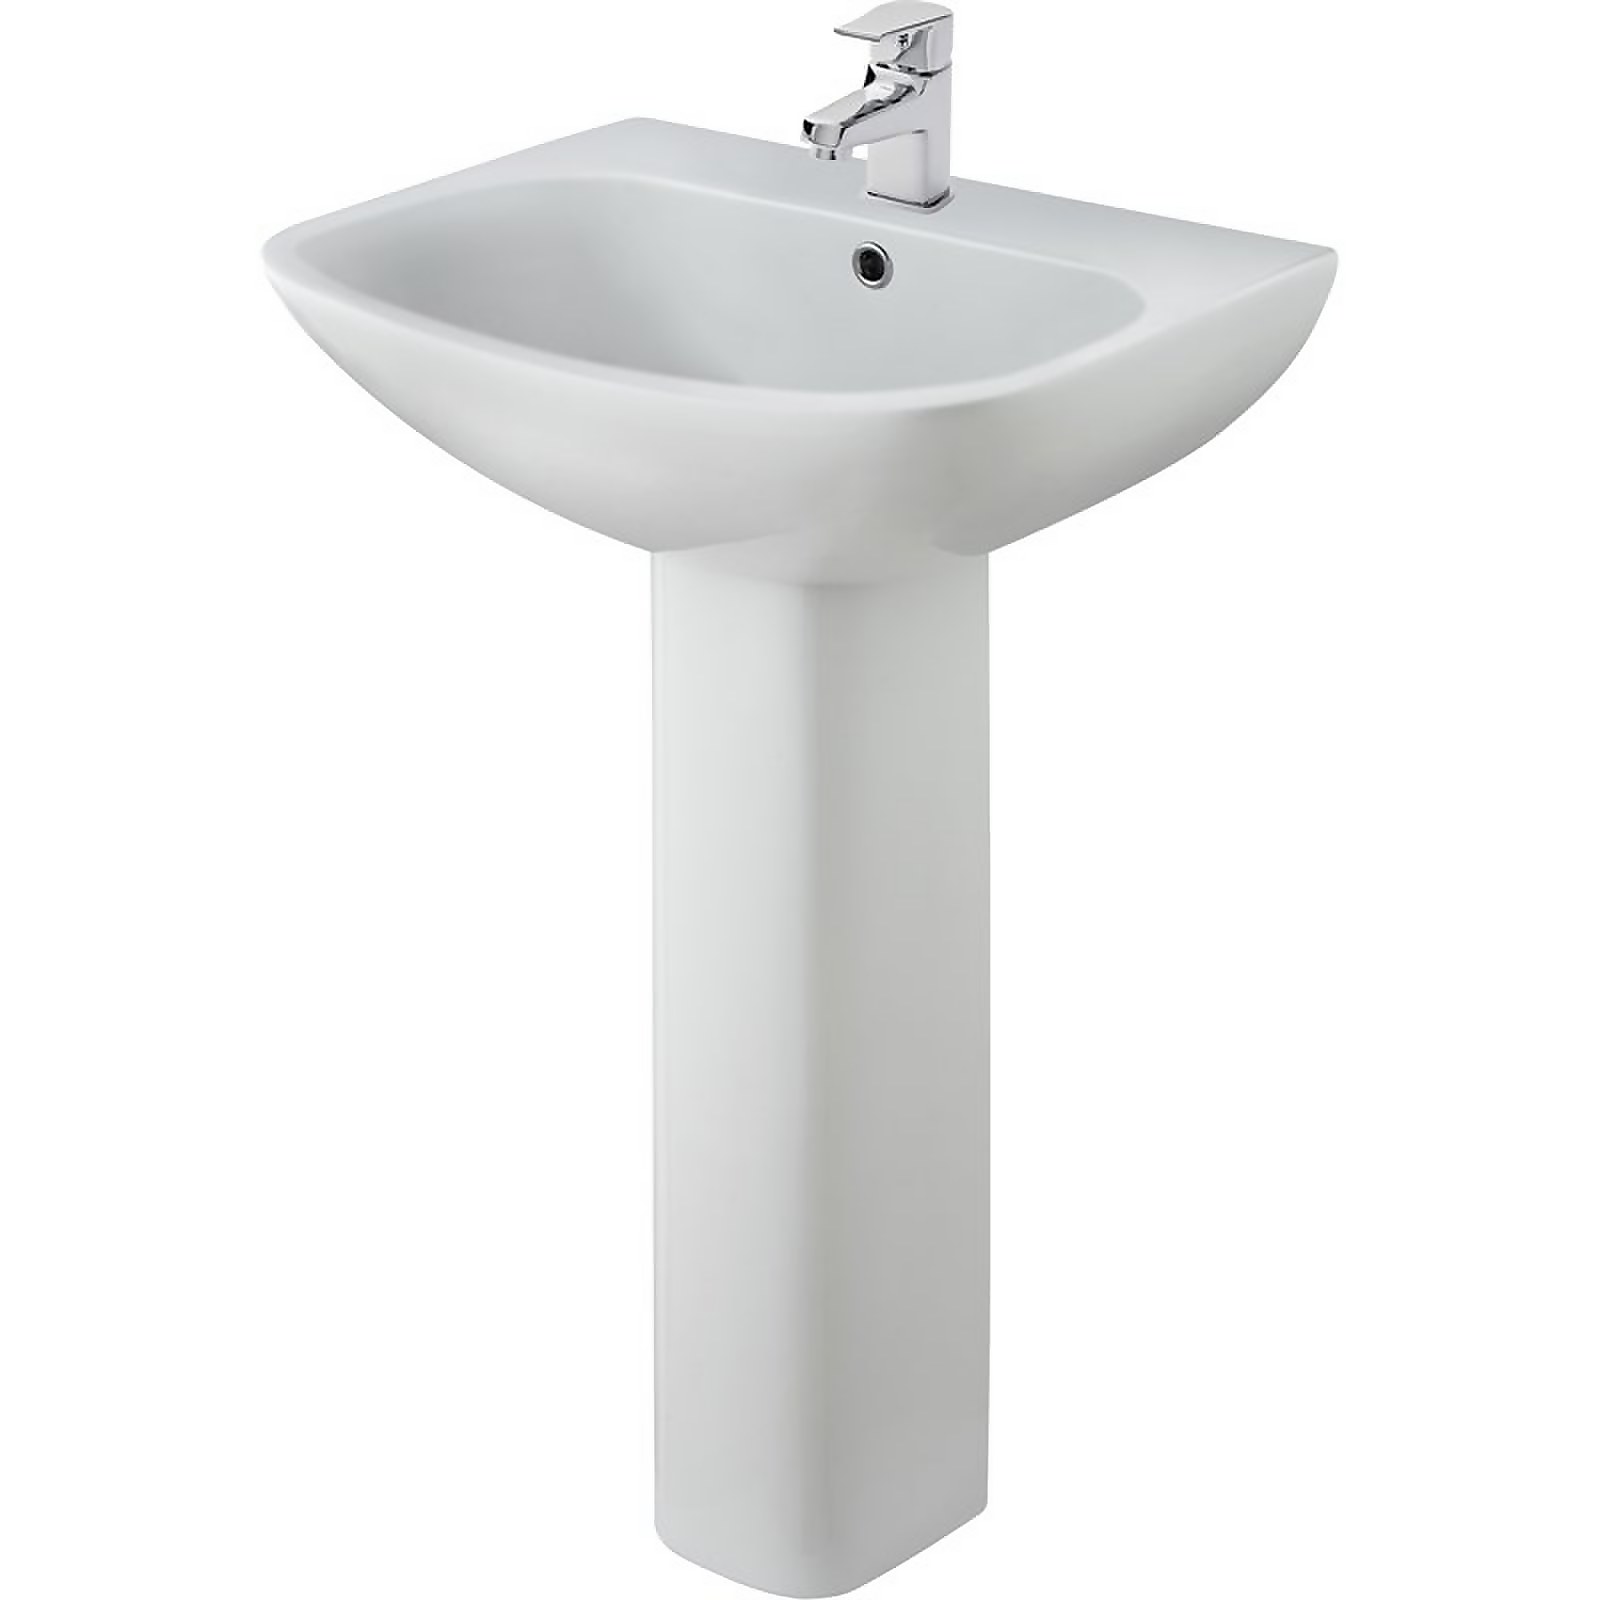 Photo of Balterley Faron 1 Tap Hole Basin And Full Pedestal - 545mm